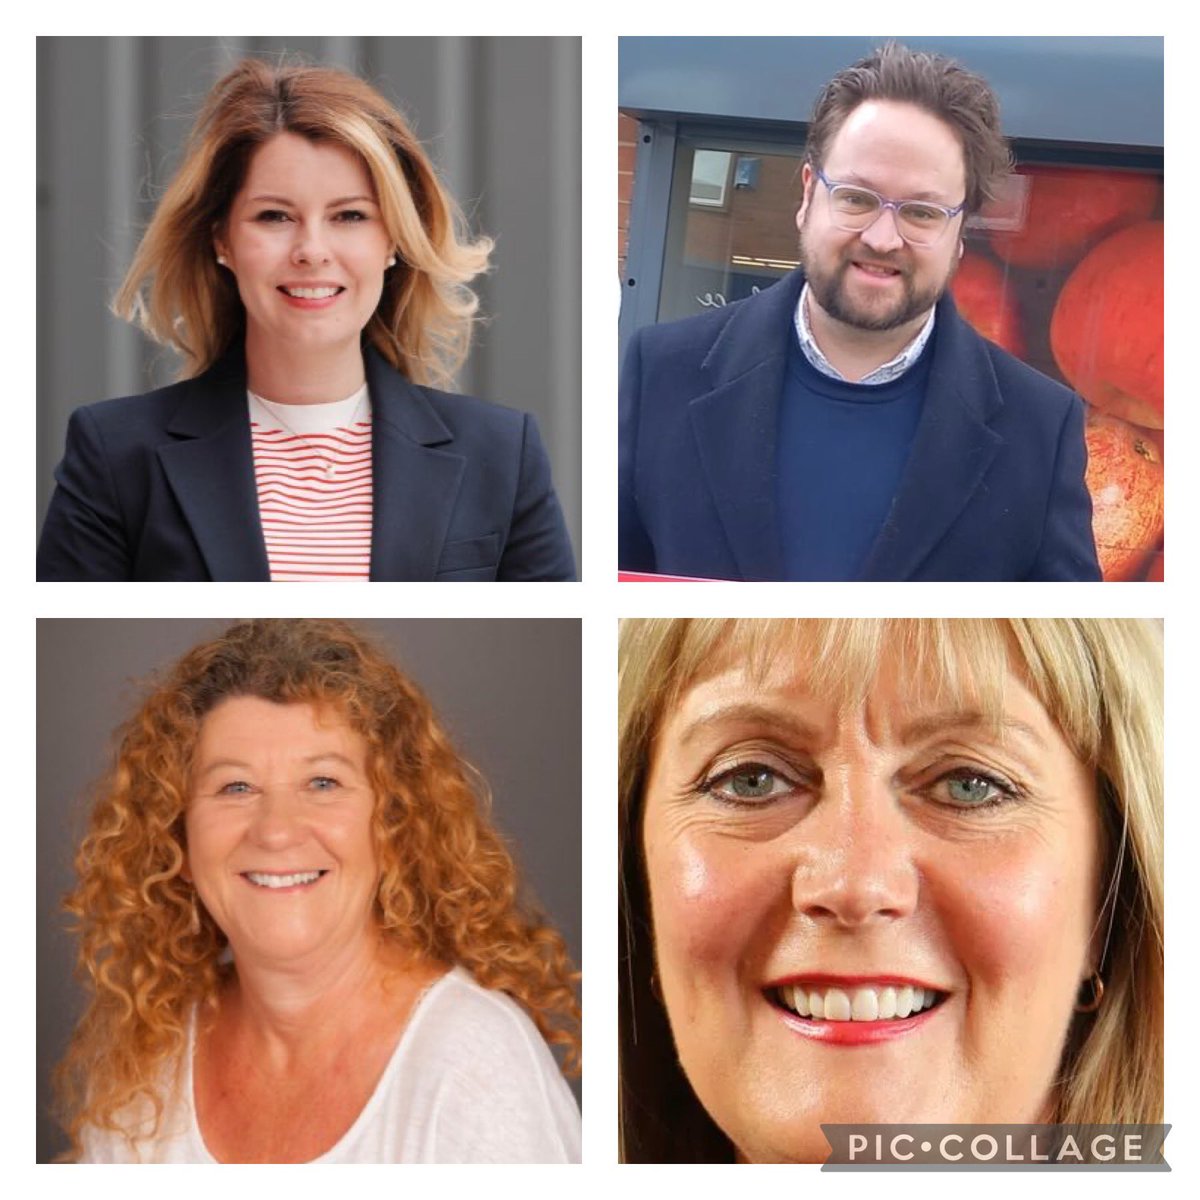 As a region we are incredibly proud of our UNISON candidates, the first NE Mayor @KiMcGuinness and PCCs @SusanDungworth @PccJoyAllen and Matt Storey, along with our newly and re-elected councillors across the region.